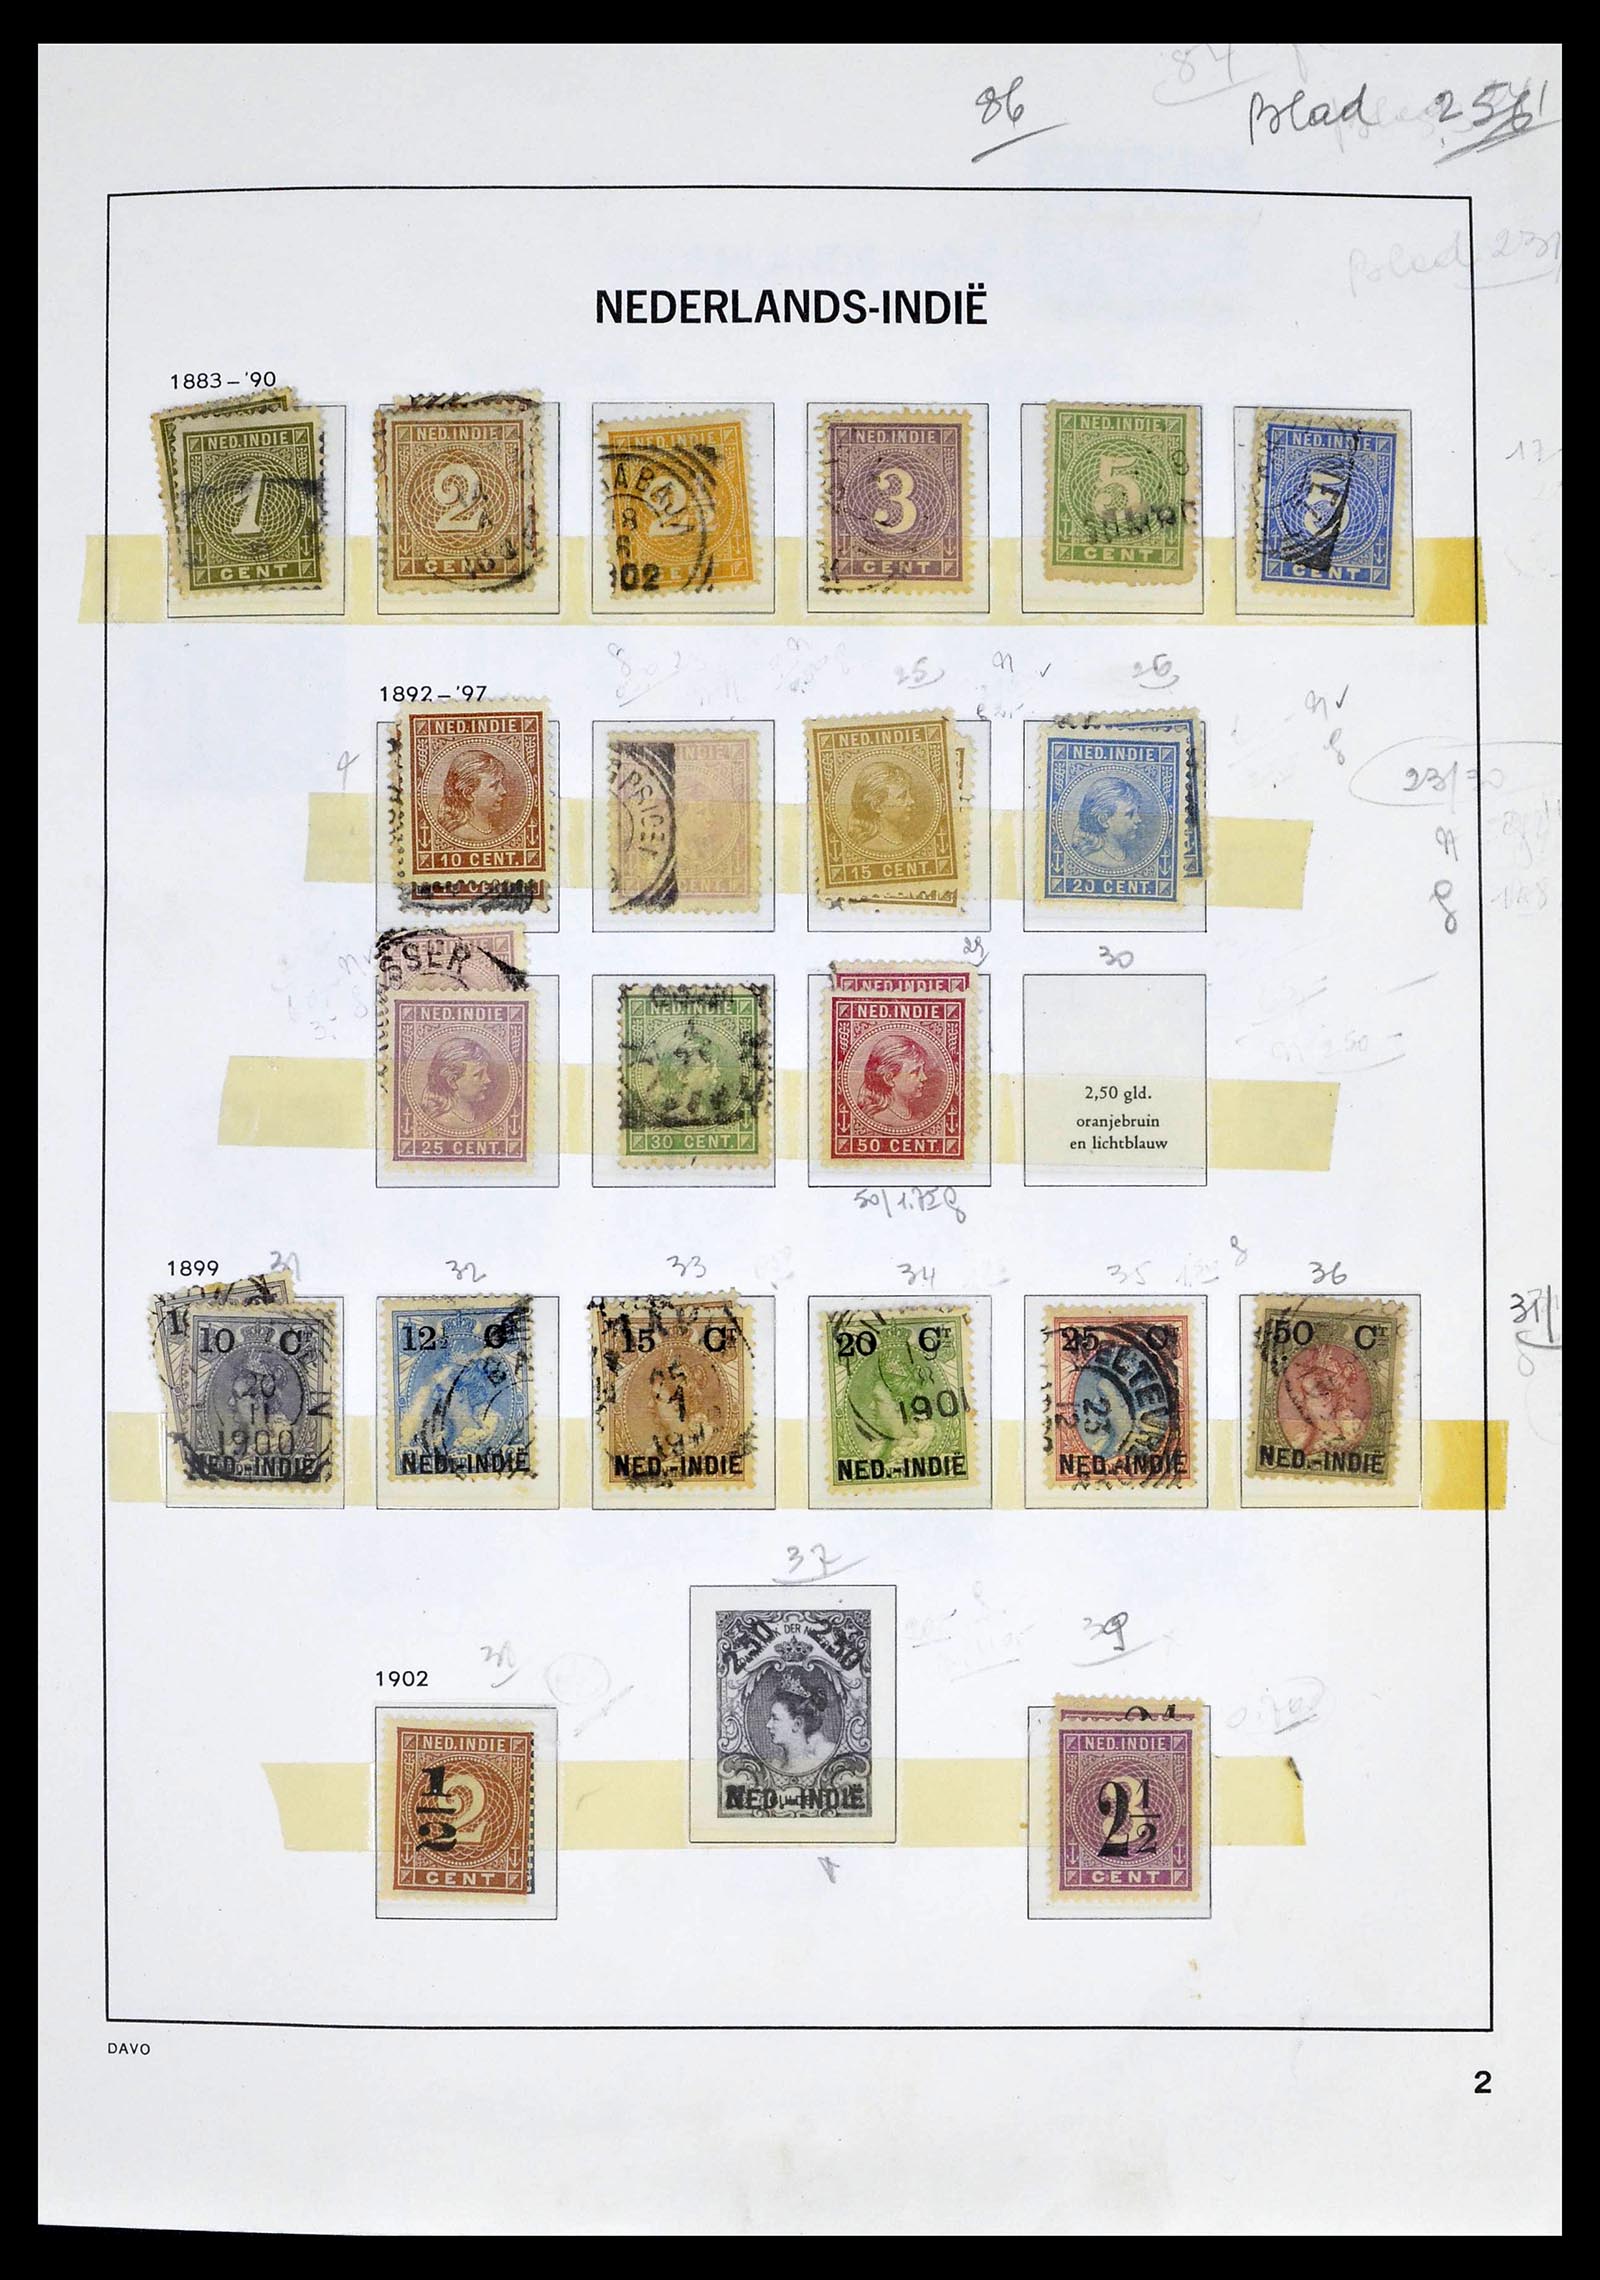 39263 0002 - Stamp collection 39263 Dutch territories 1864-1970.